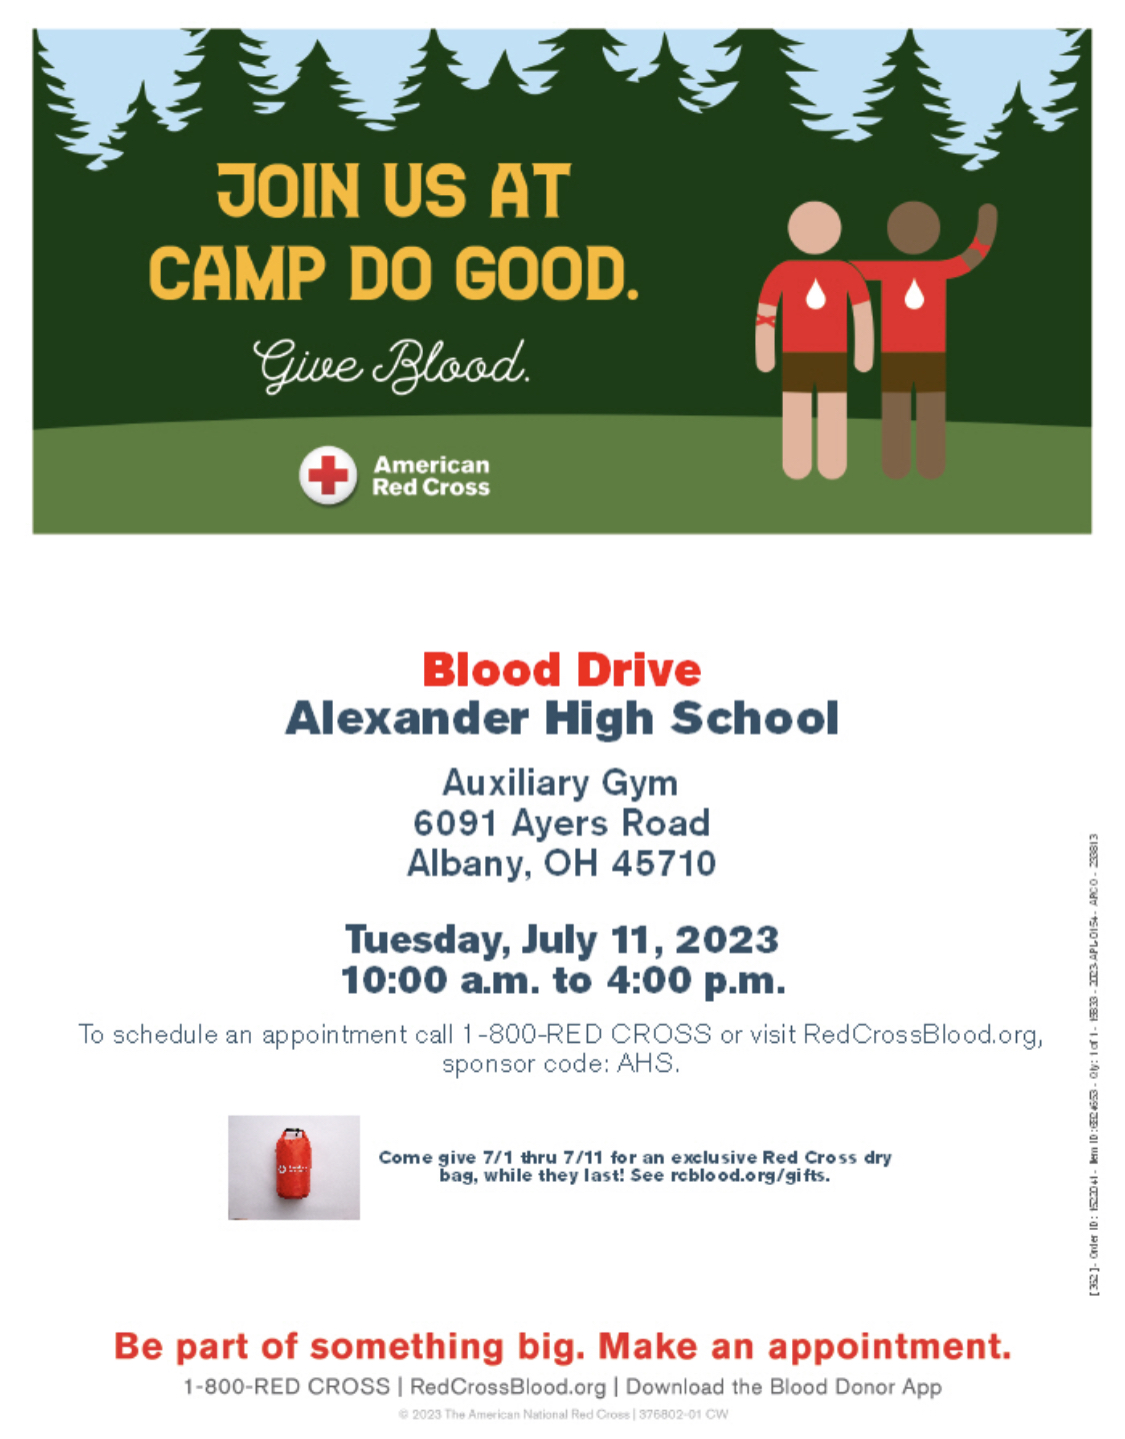 A flyer reading: Join us at camp do good Give blood. Blood Drive. Alexander High school Auxiliary Gym 6091 Ayers Rd. Albany, OH 45710 Tuesday July 11, 2023 10 a.m. to 4 p.m. The information is on a flyer with clip art of two people in front of a line of pine trees.